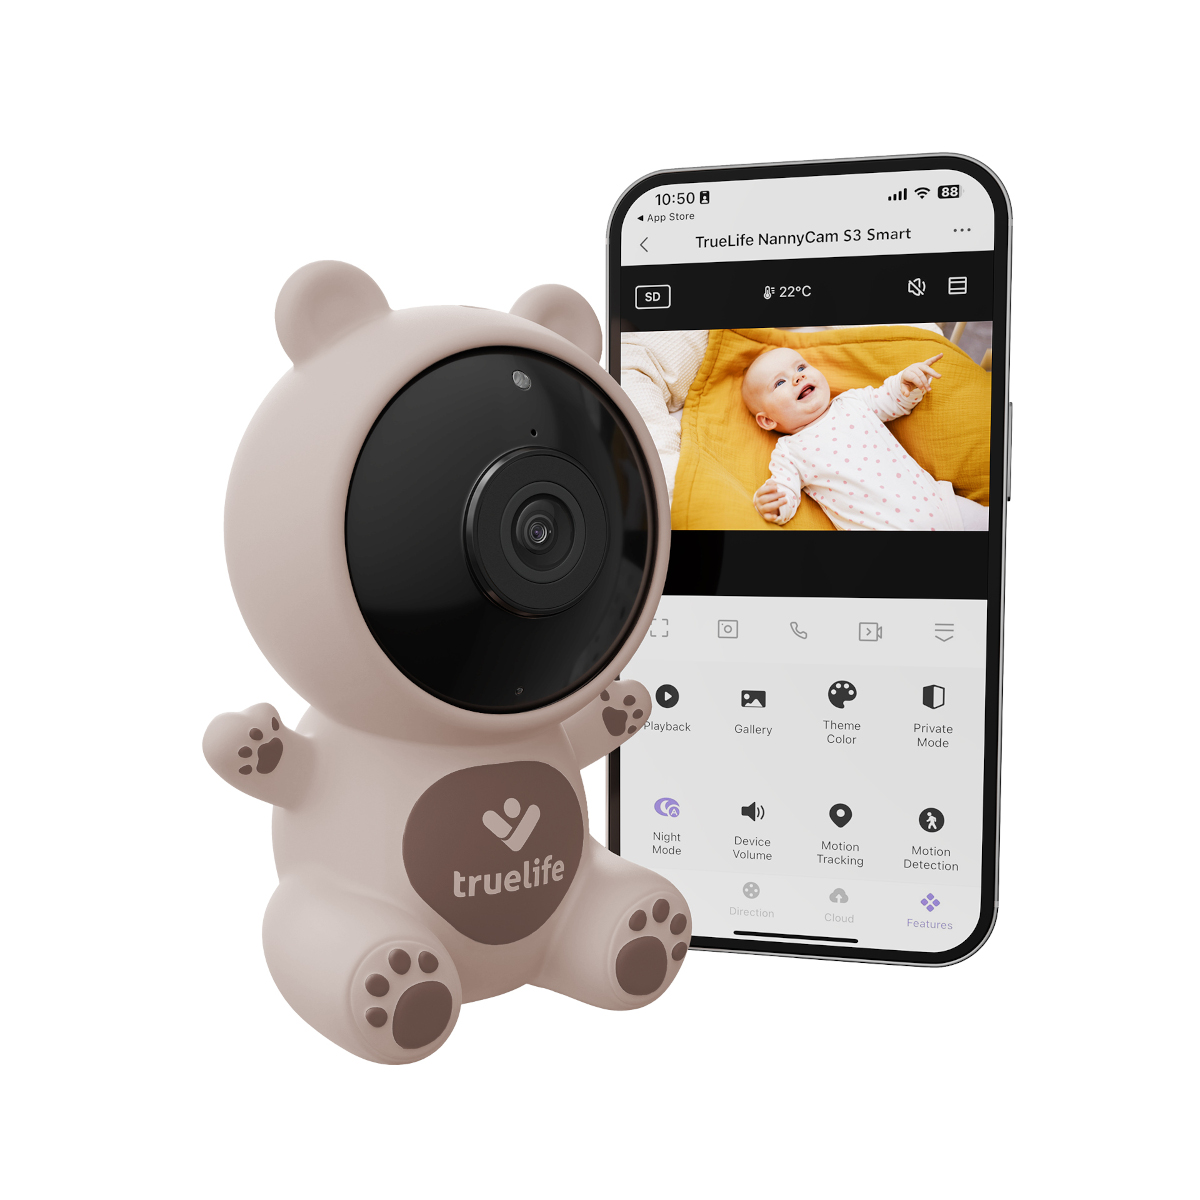 TrueLife NannyCam S3 Smart – the bear guardian that doesn't miss a thing